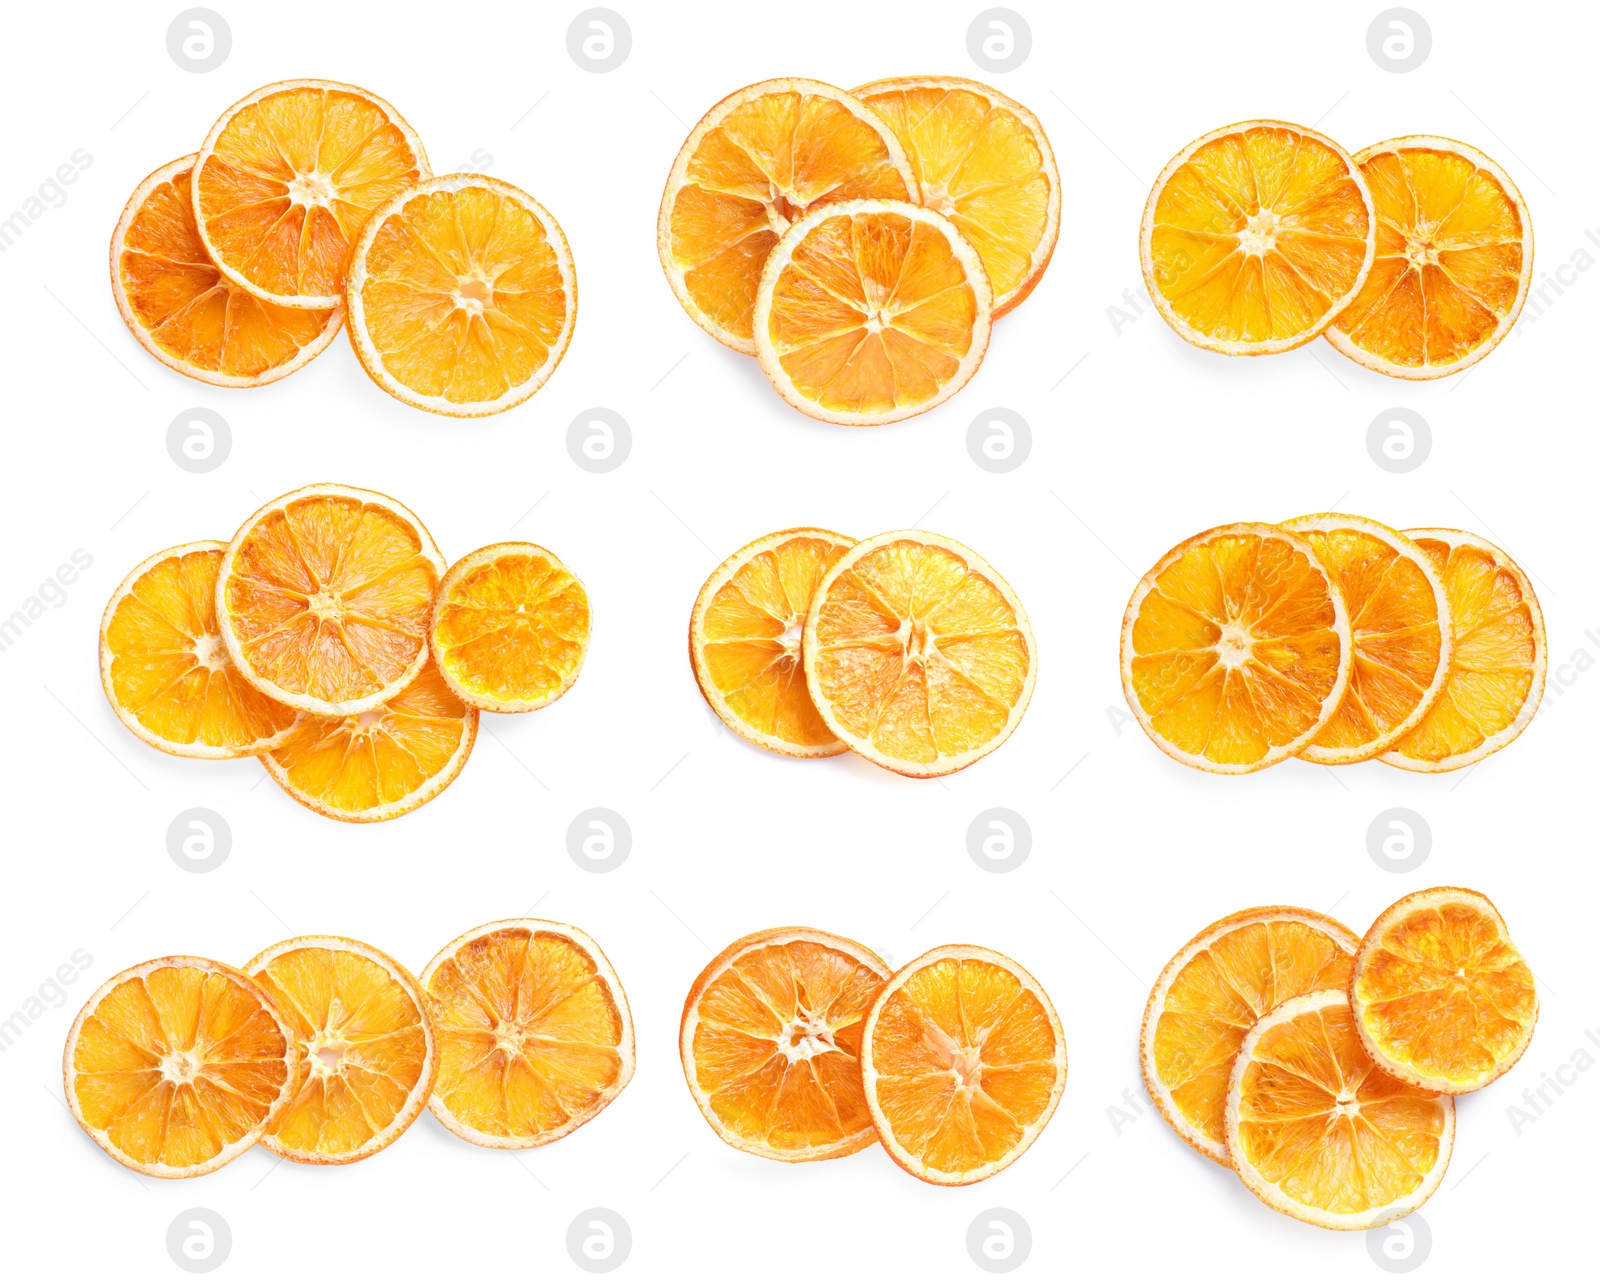 Image of Collage with dry orange slices on white background, top view